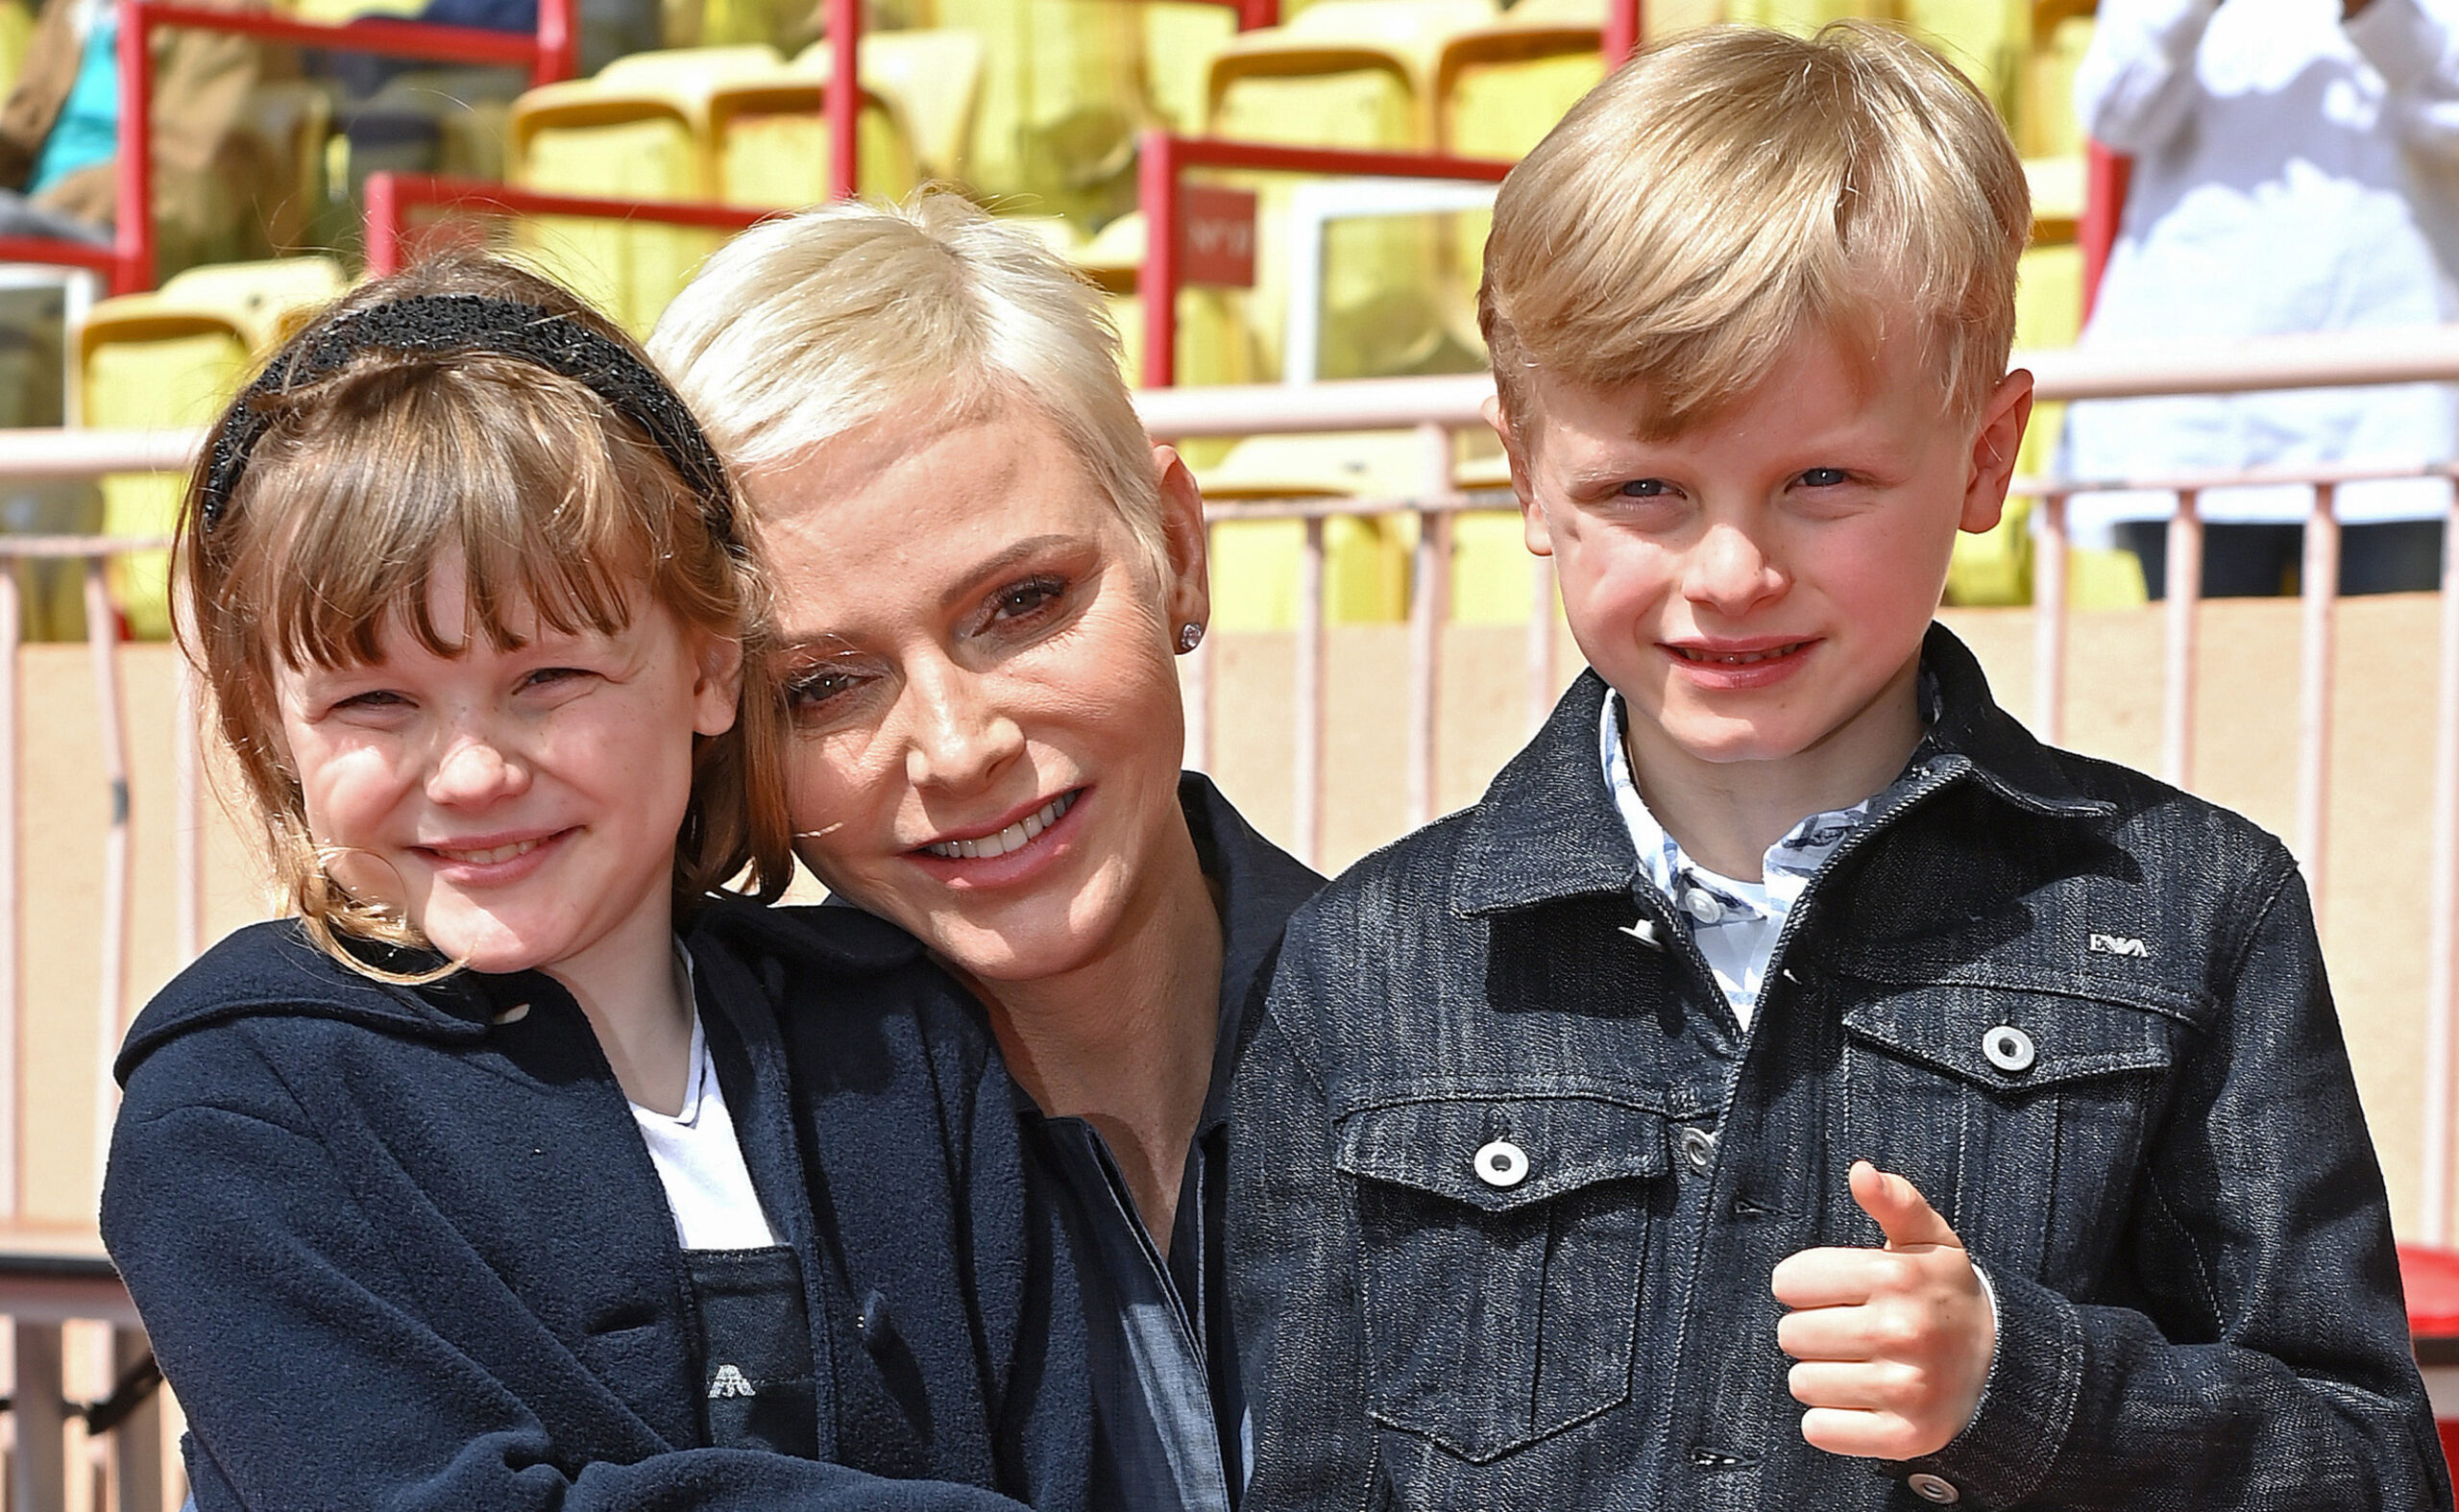 Who do Princess Charlene and Prince Albert’s adorable twin children most resemble? New family photos make it obvious